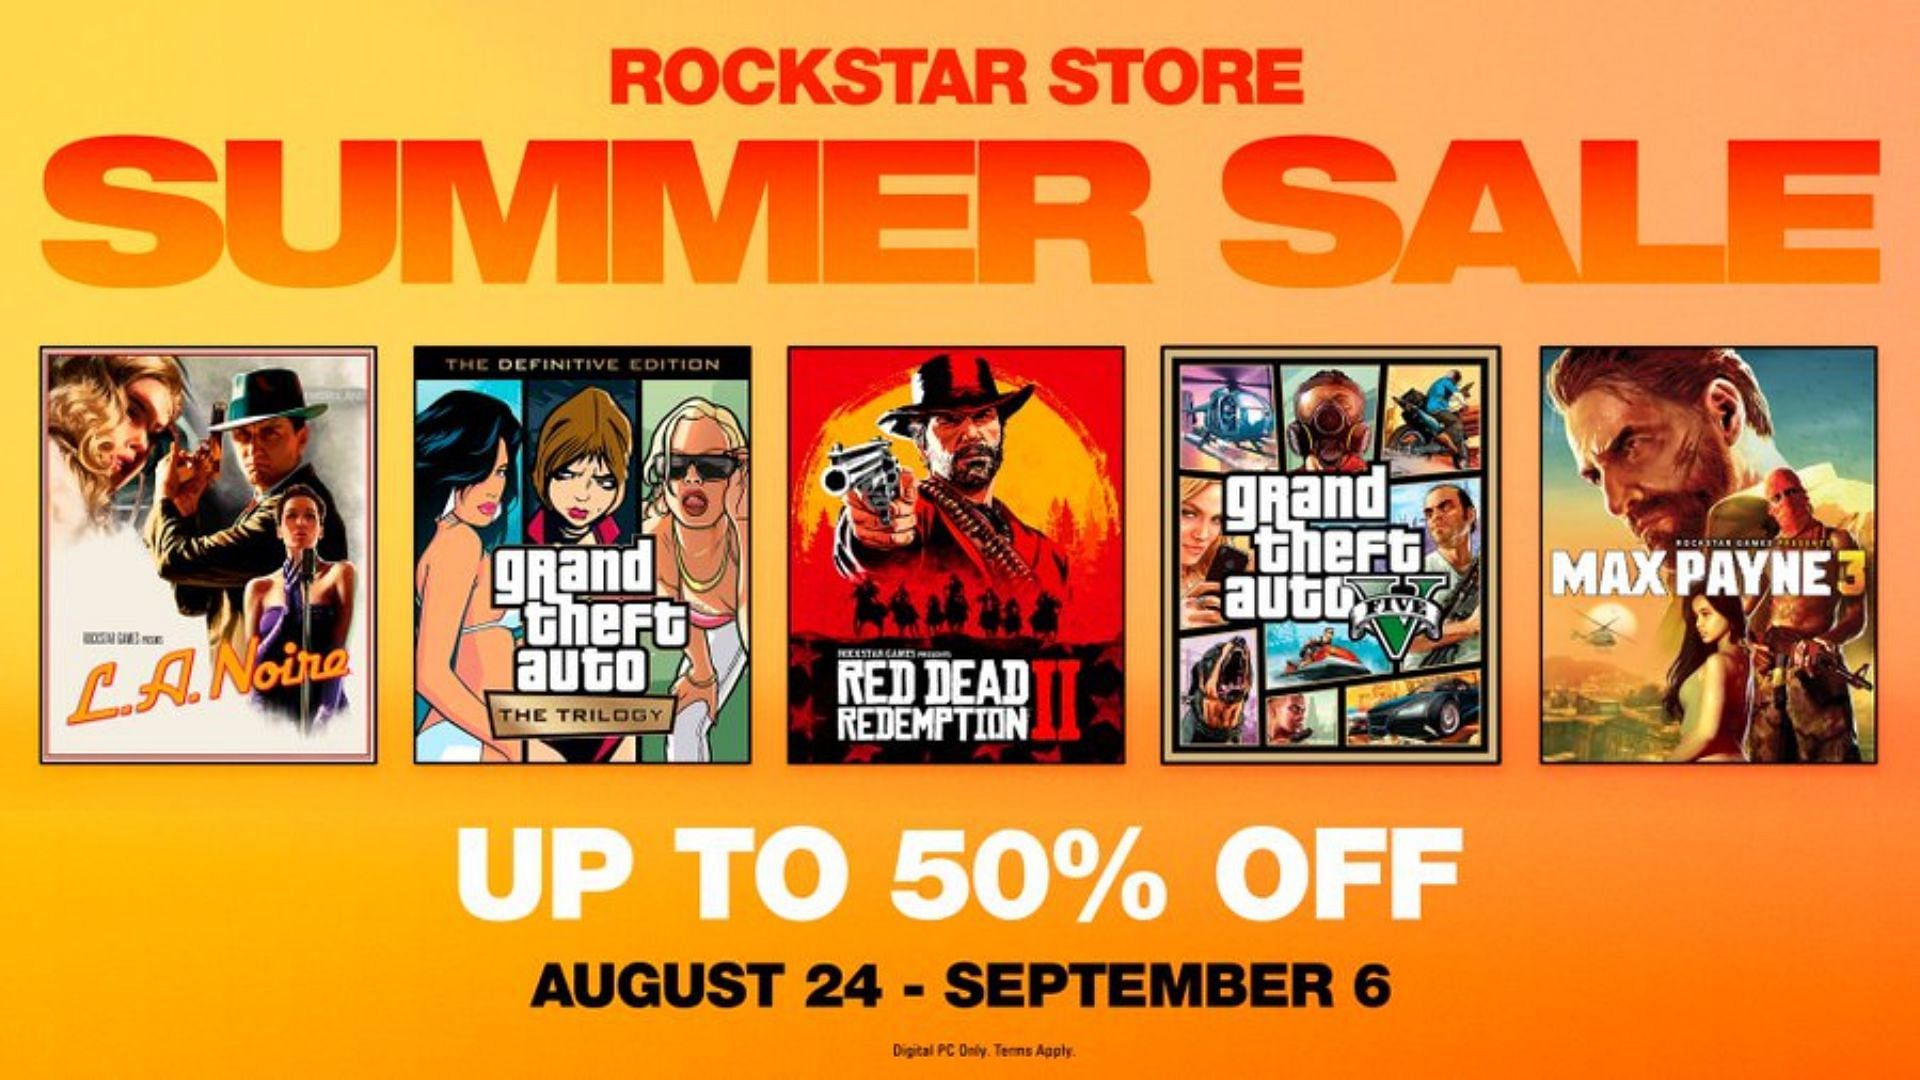 GTA 5 is now available at a massive 50% discount on Rockstar Store (Image via Rockstar Games)